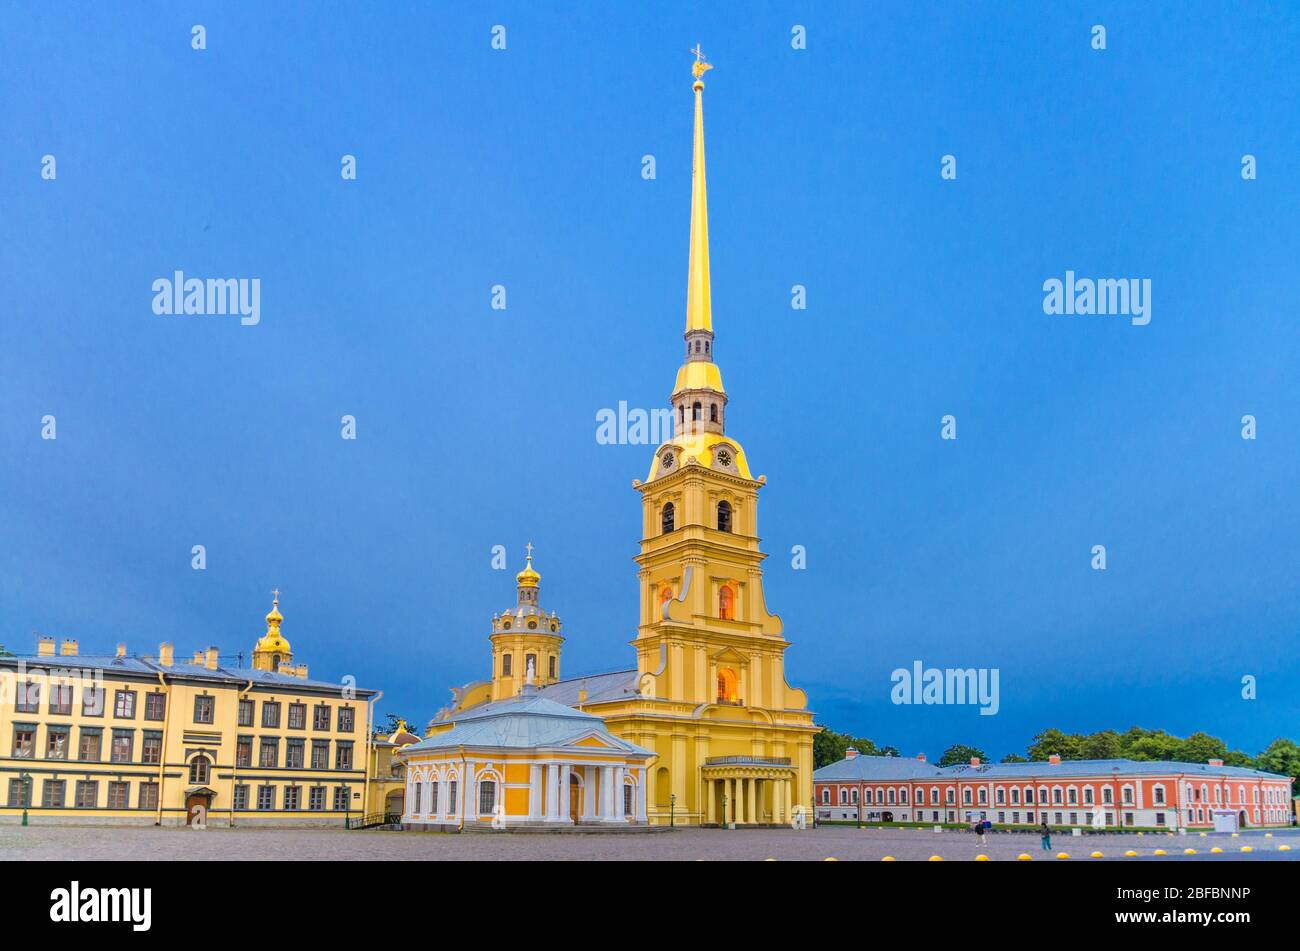 Saints Peter and Paul Cathedral Orthodox church with golden spire in Peter and Paul Fortress citadel on Zayachy Hare Island, evening dusk twilight vie Stock Photo